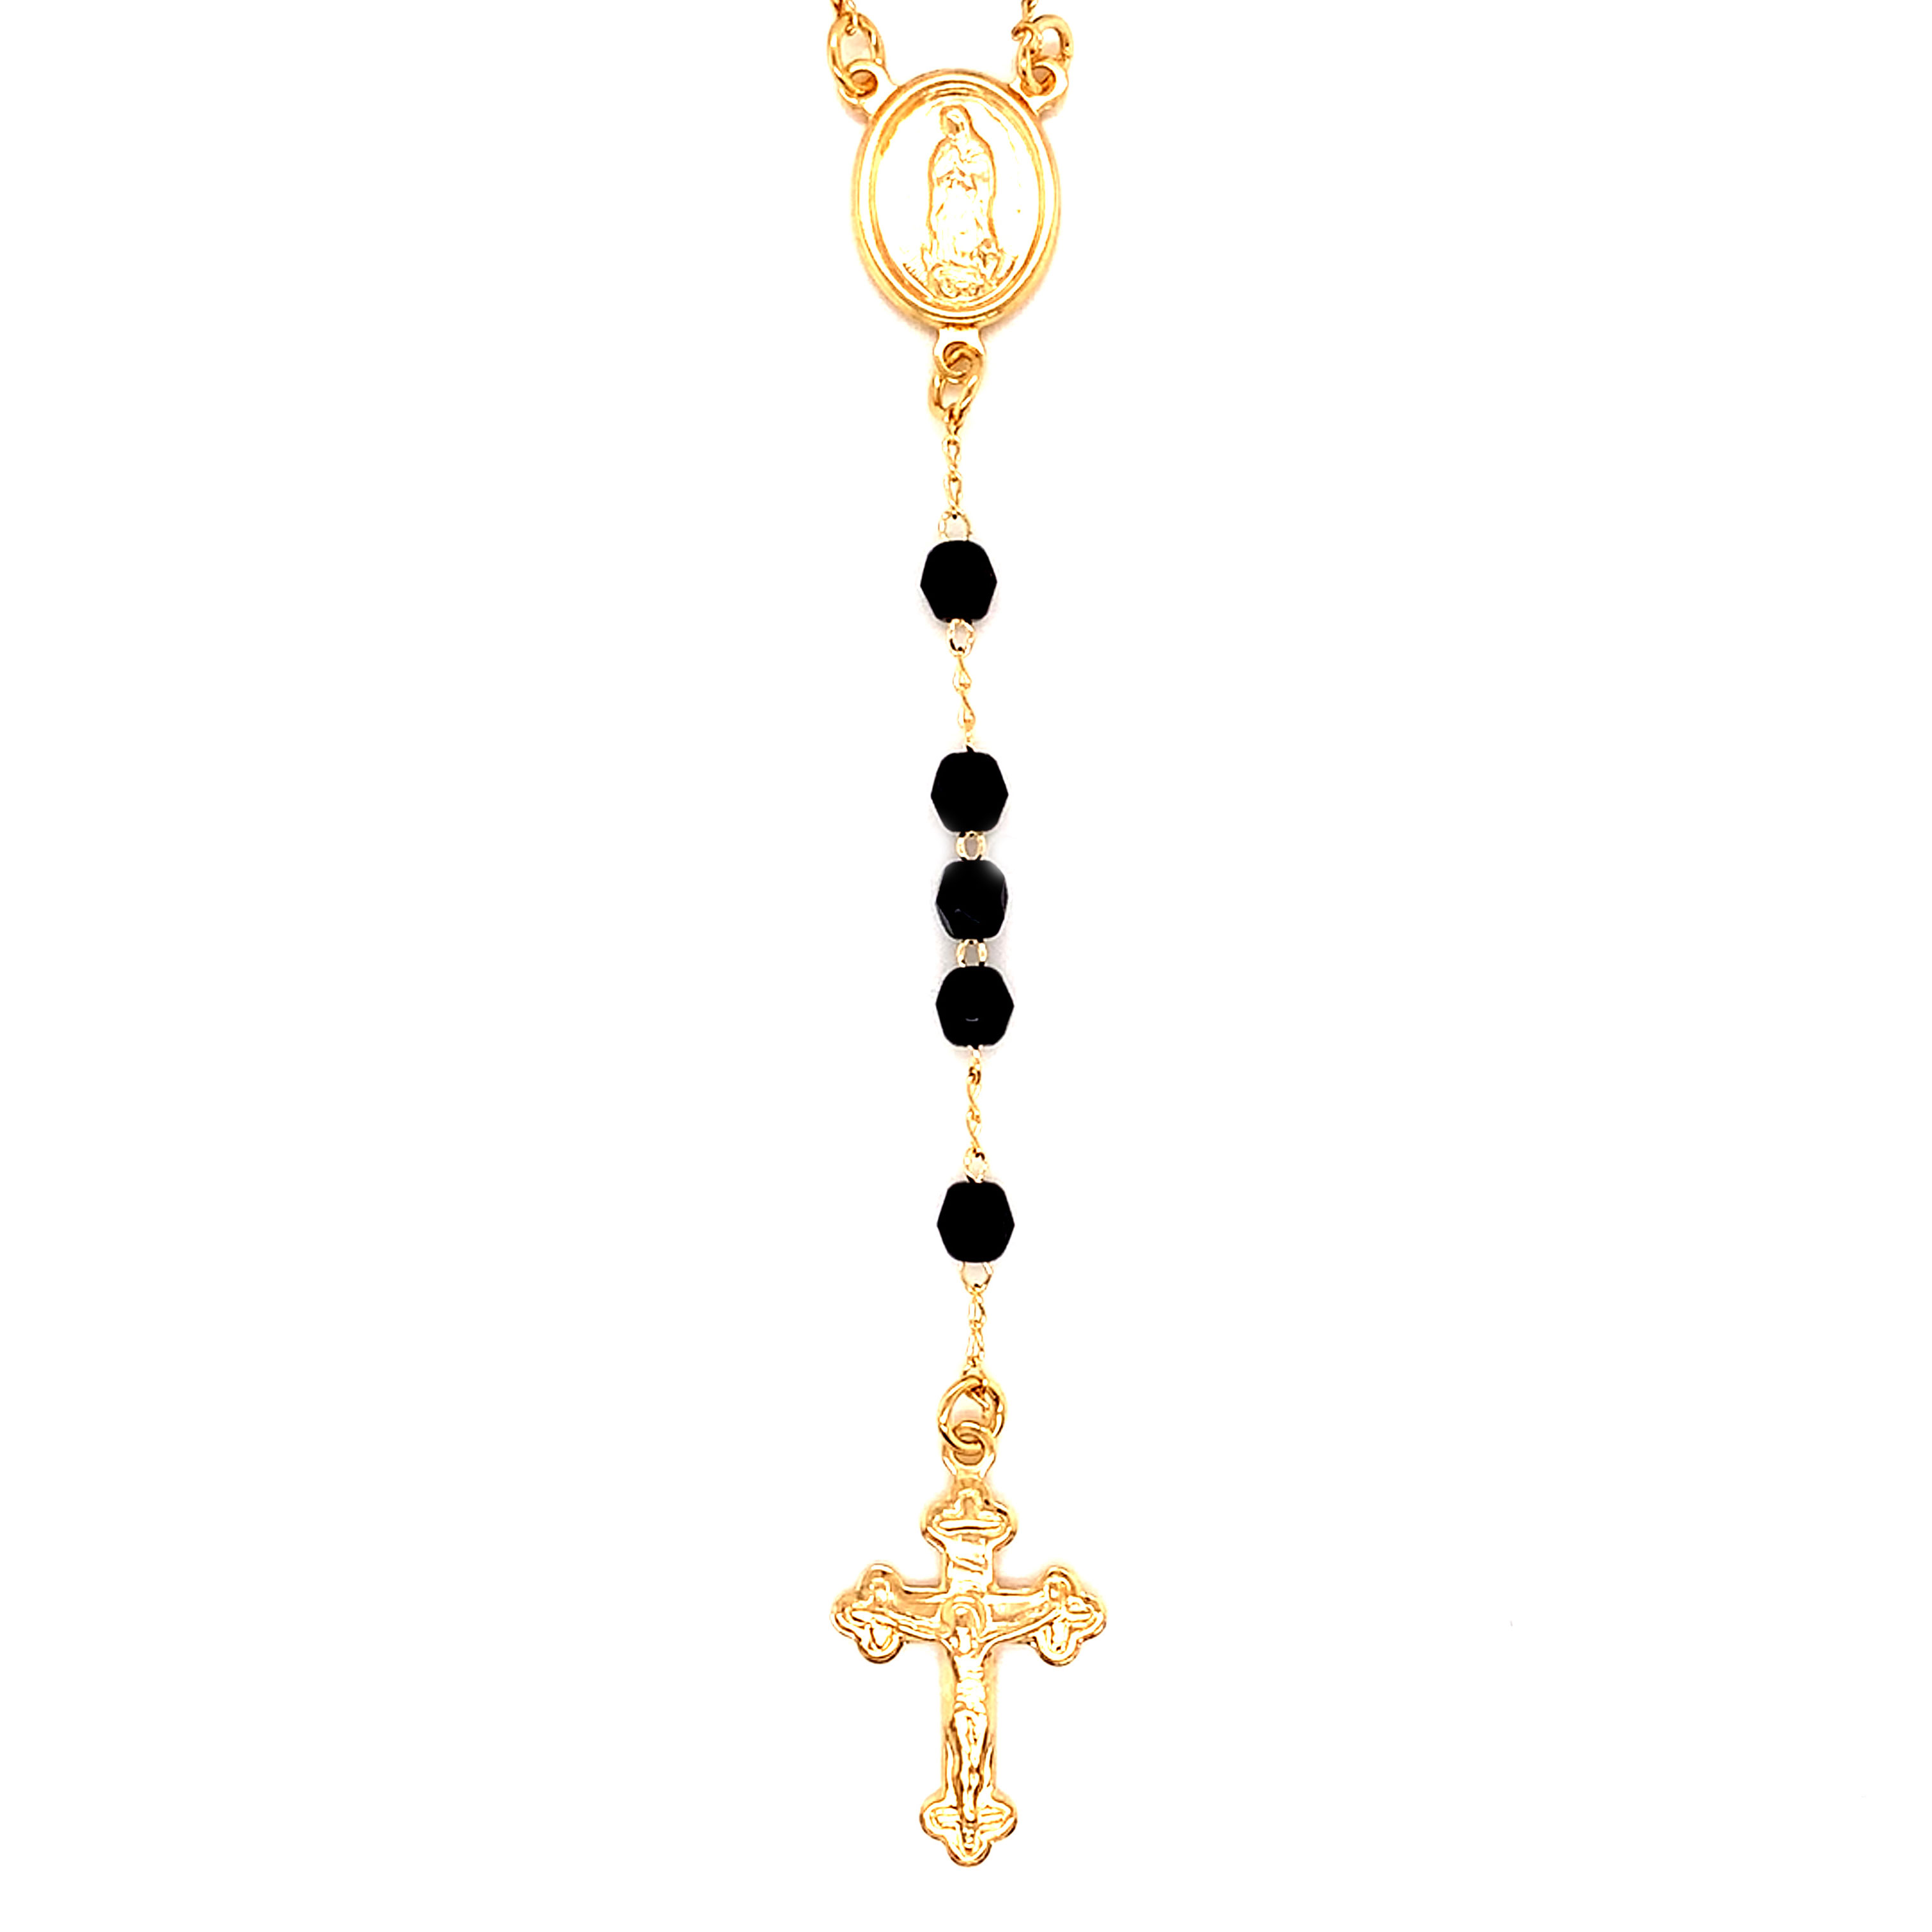 Black Crystal Rosary Necklace - Gold Filled